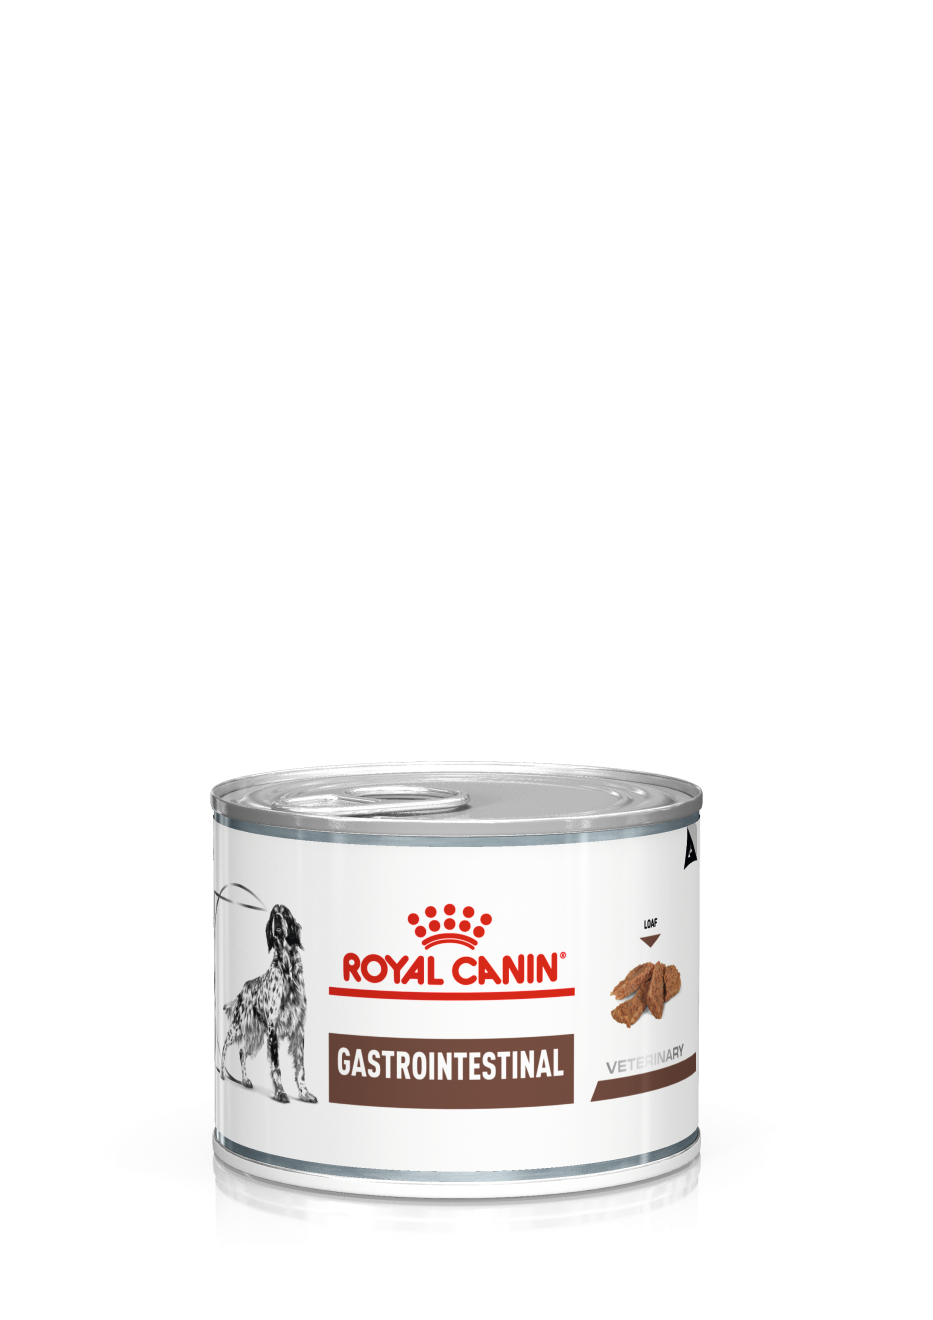 Royal Canin Gastrointestinal Mousse 